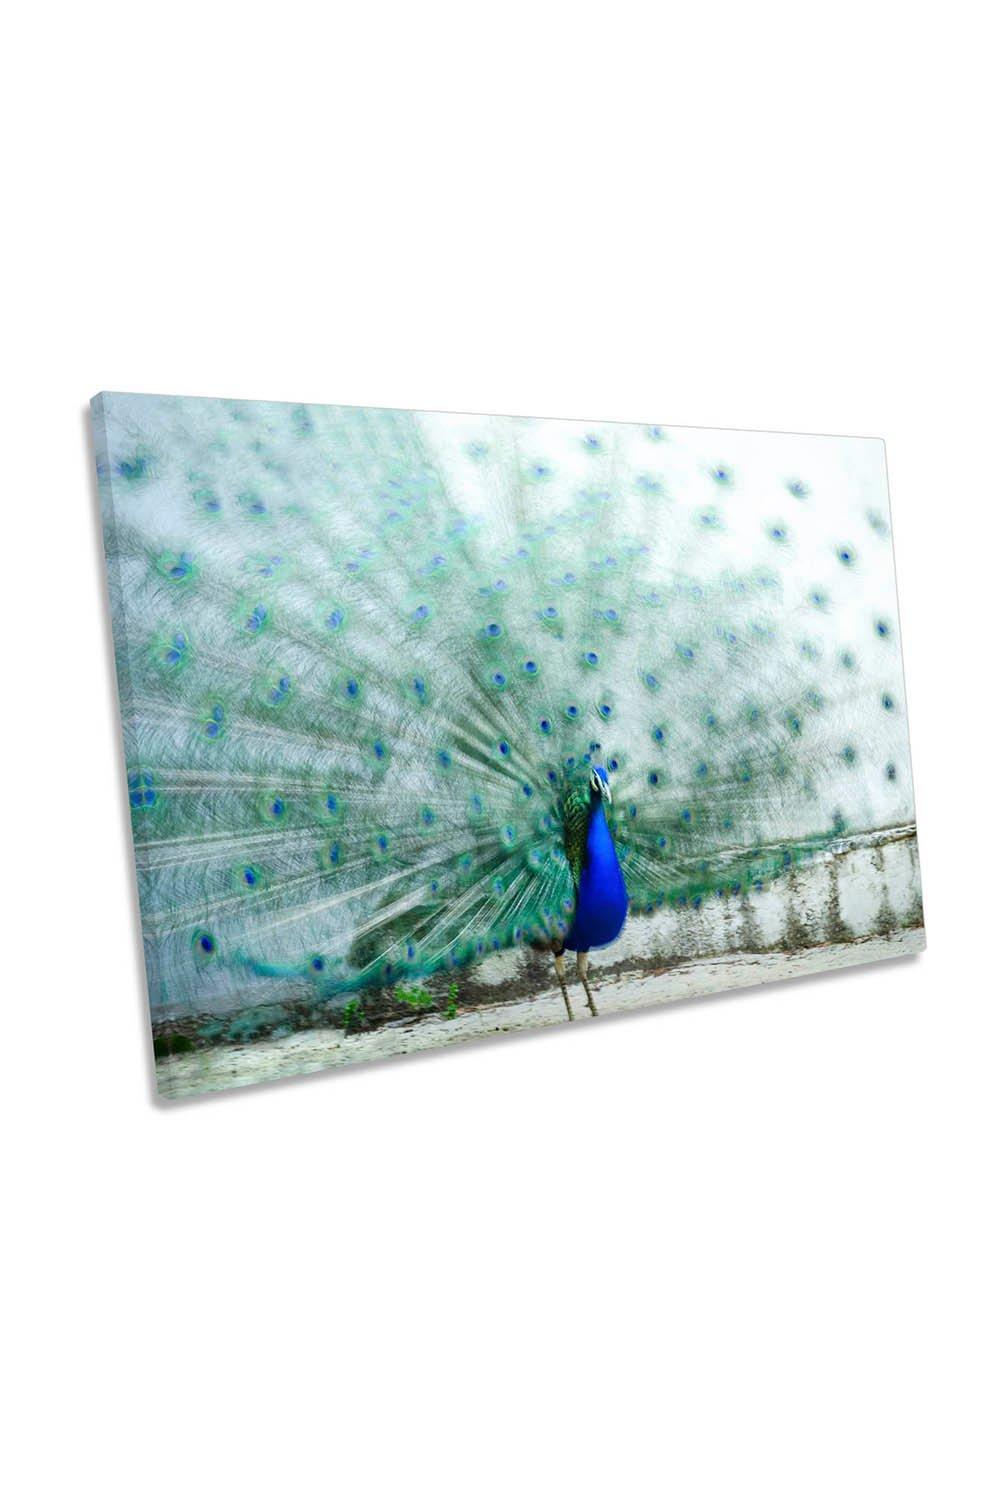 Peacock Bird Feathers Green and Blue Canvas Wall Art Picture Print